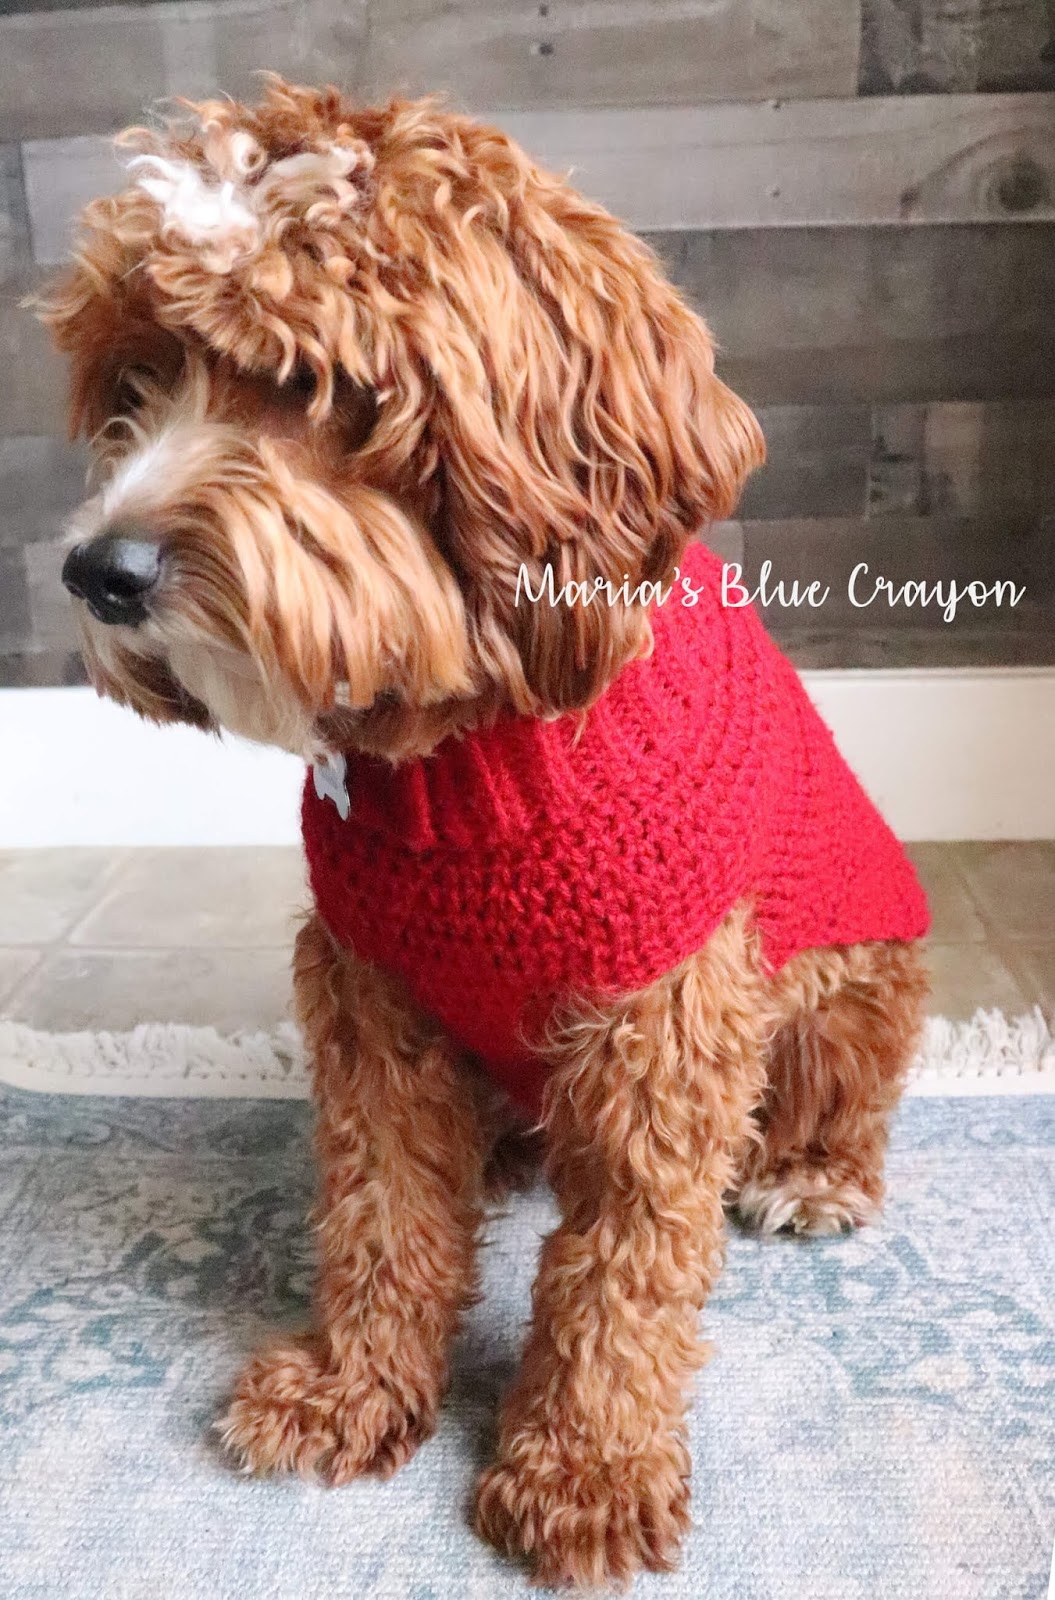 Crochet Basic Dog Sweater - Free Step by Step Tutorial - Maria's Blue